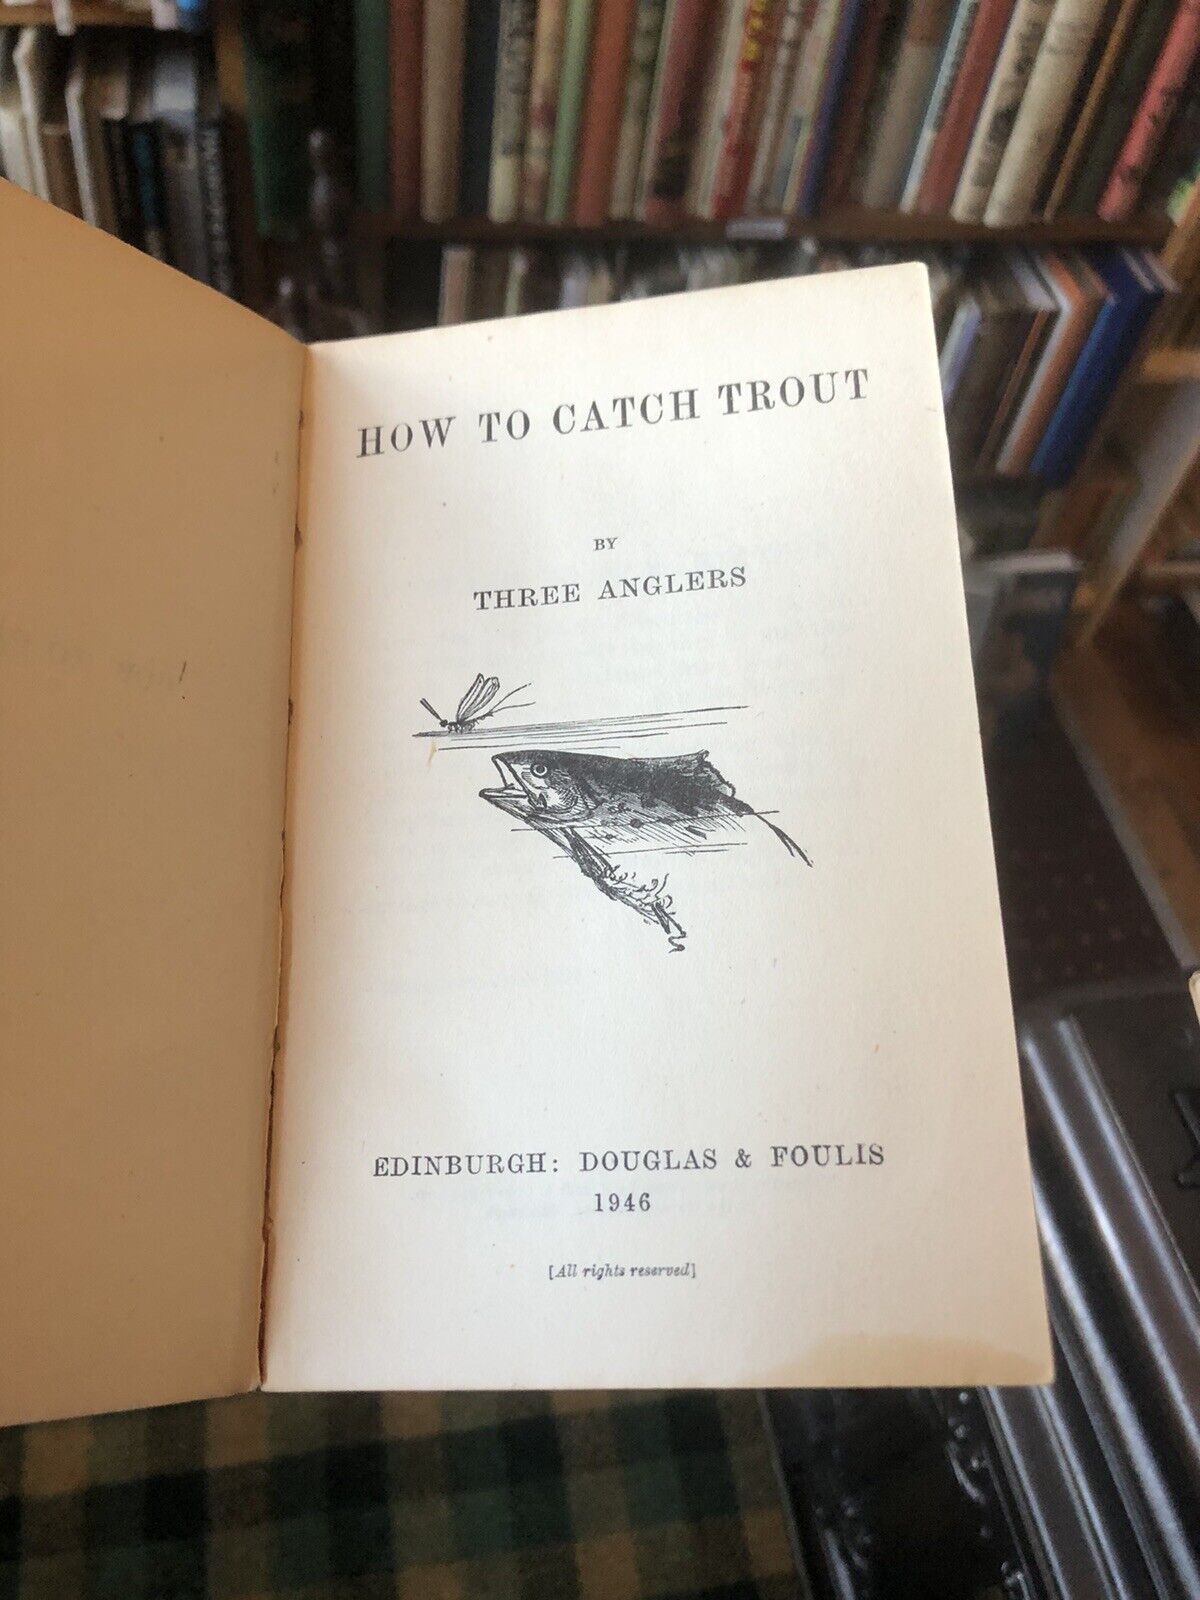 How to Catch Trout by Three Anglers : Fly Fishing : Minnow &amp; Worm Fishing Flies